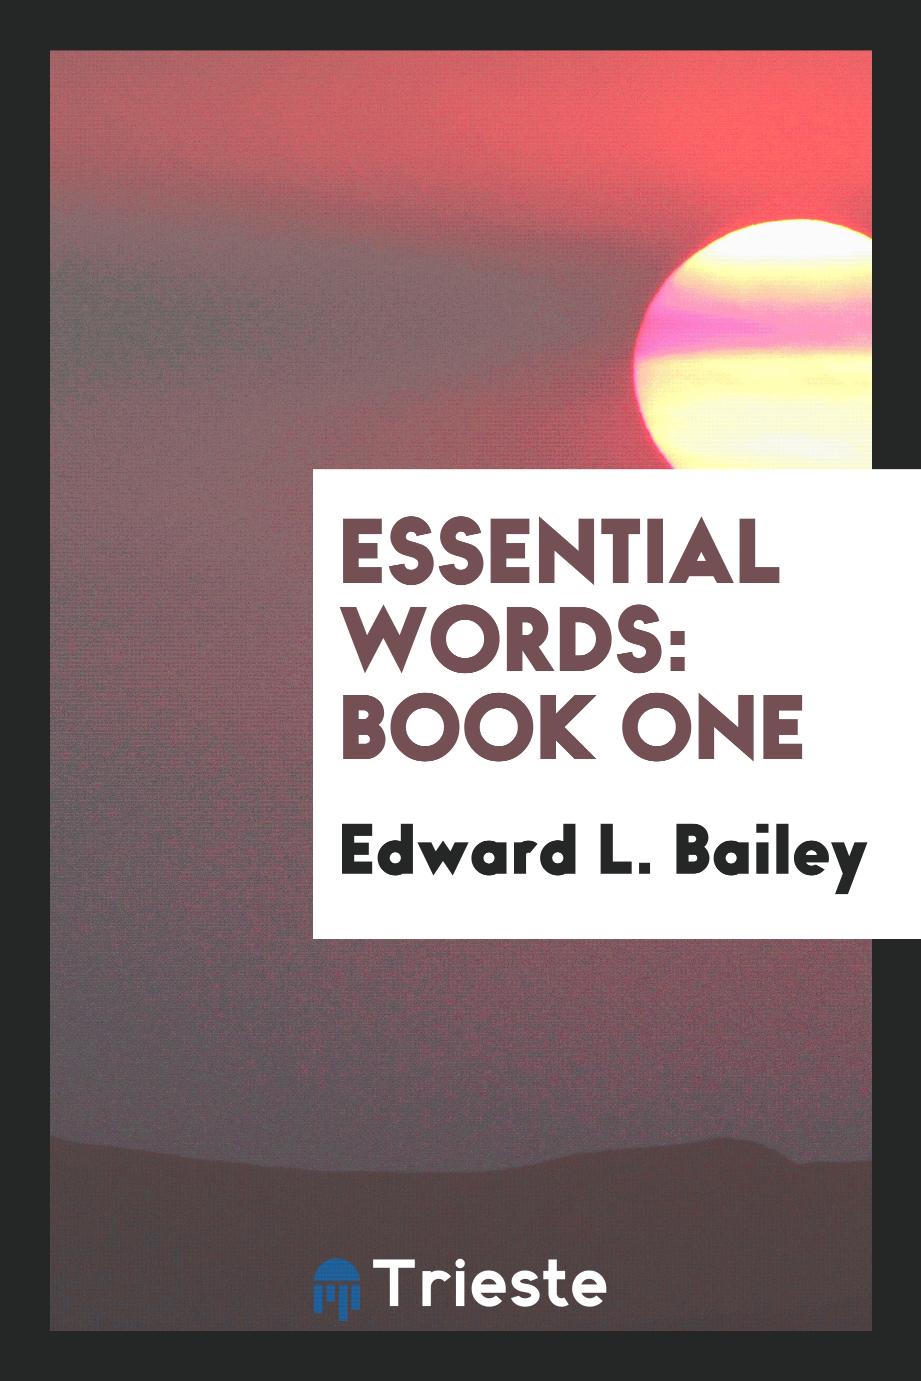 Essential Words: Book One